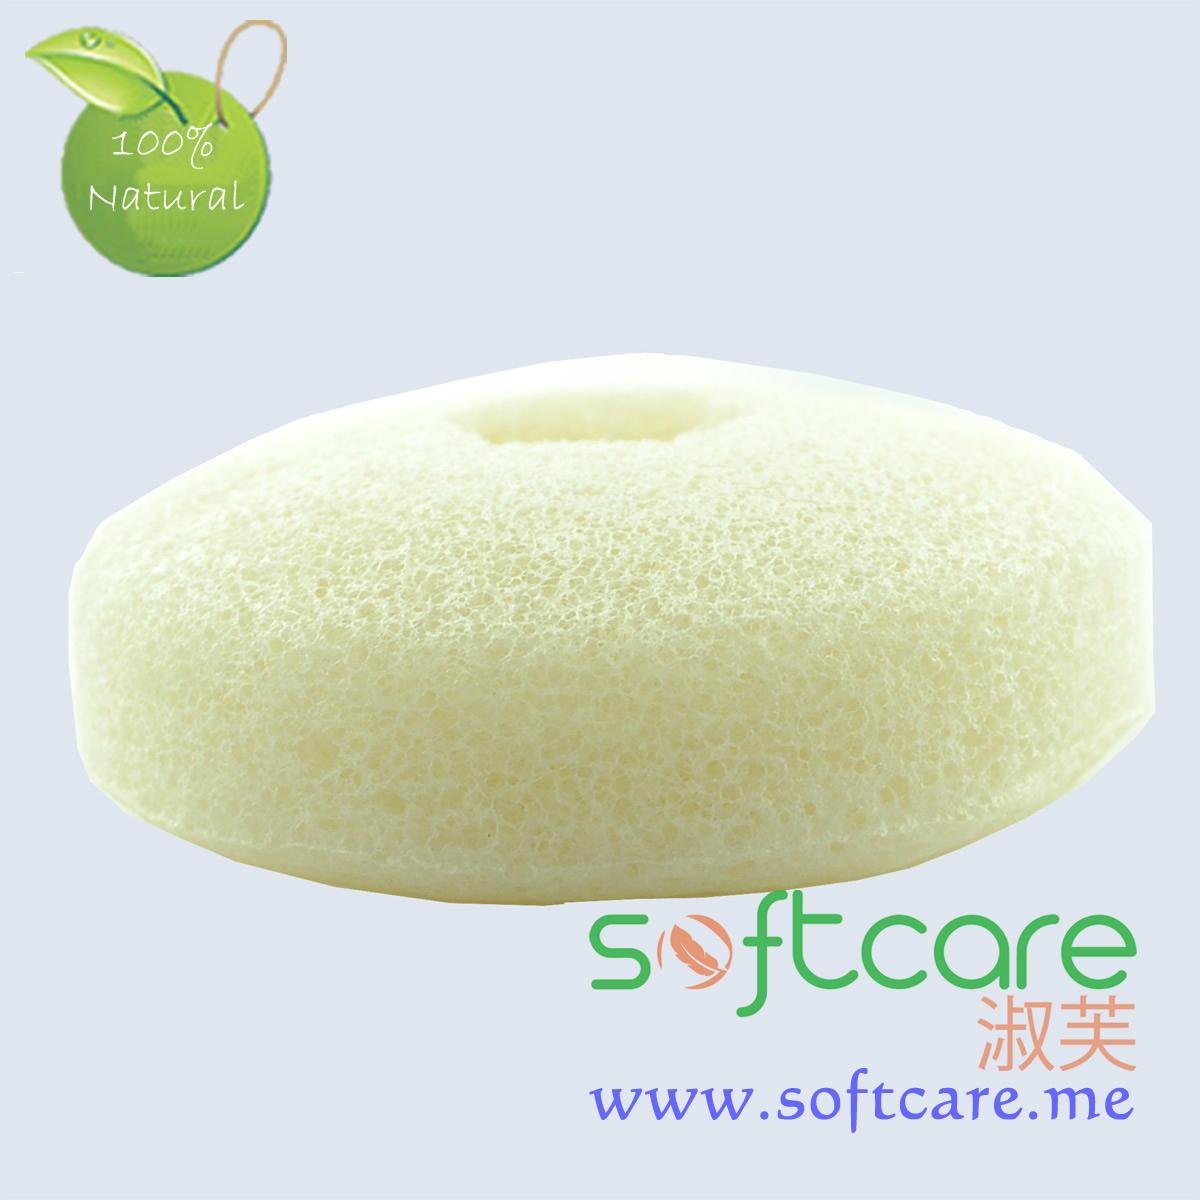 SOFTCARE round cake type 100% natural facial cleansing konjac sponge 2